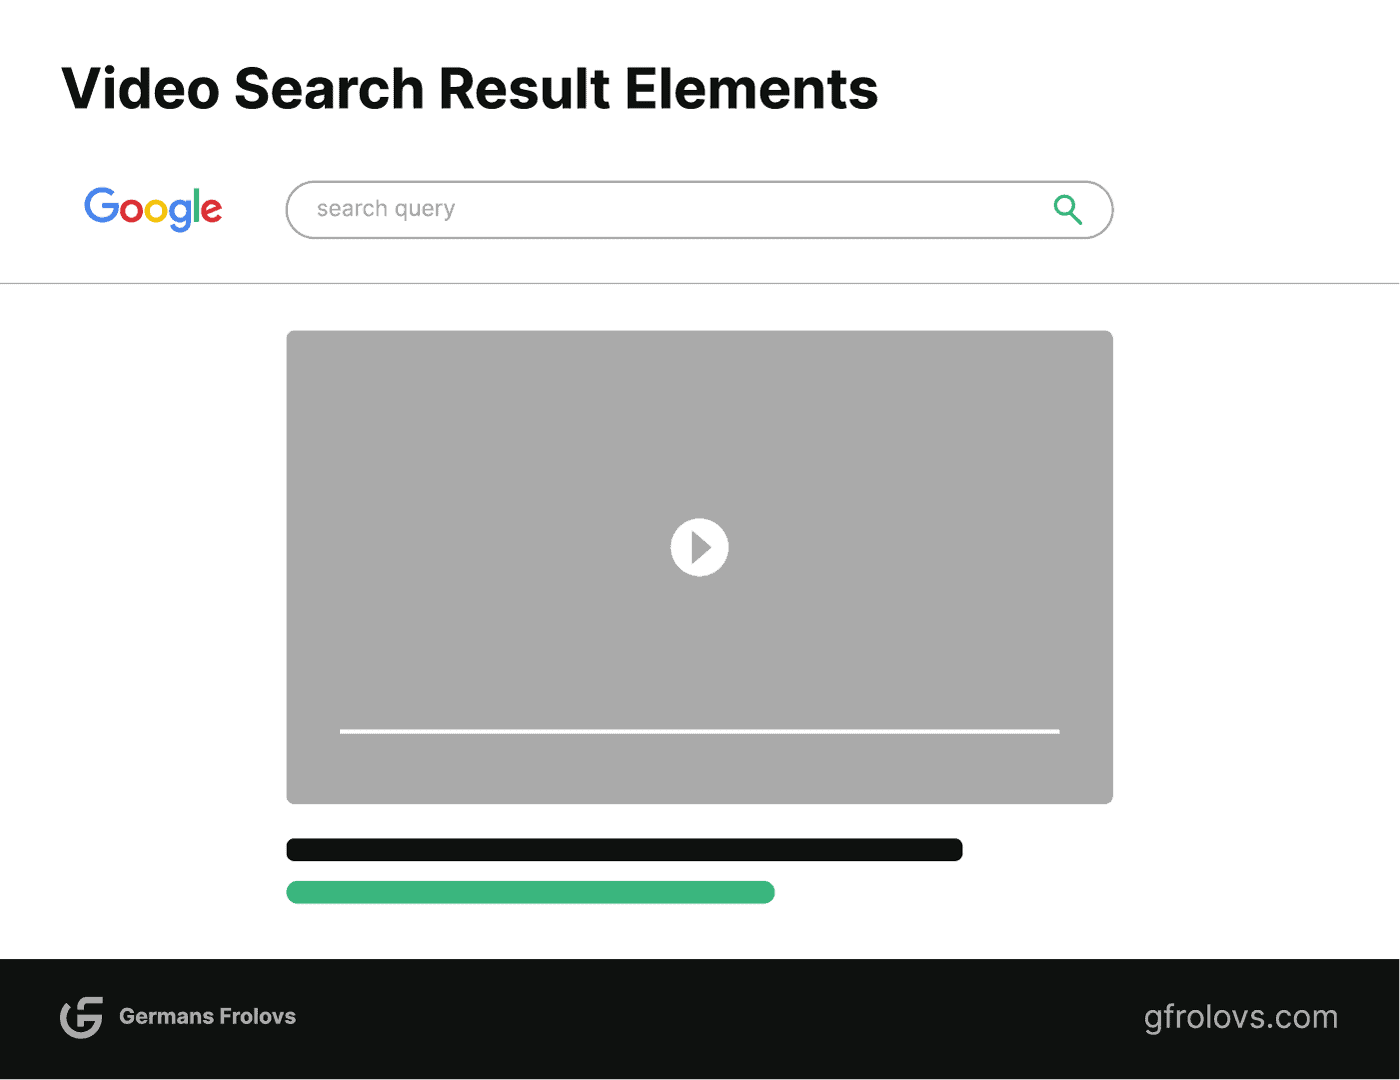 Video search result elements